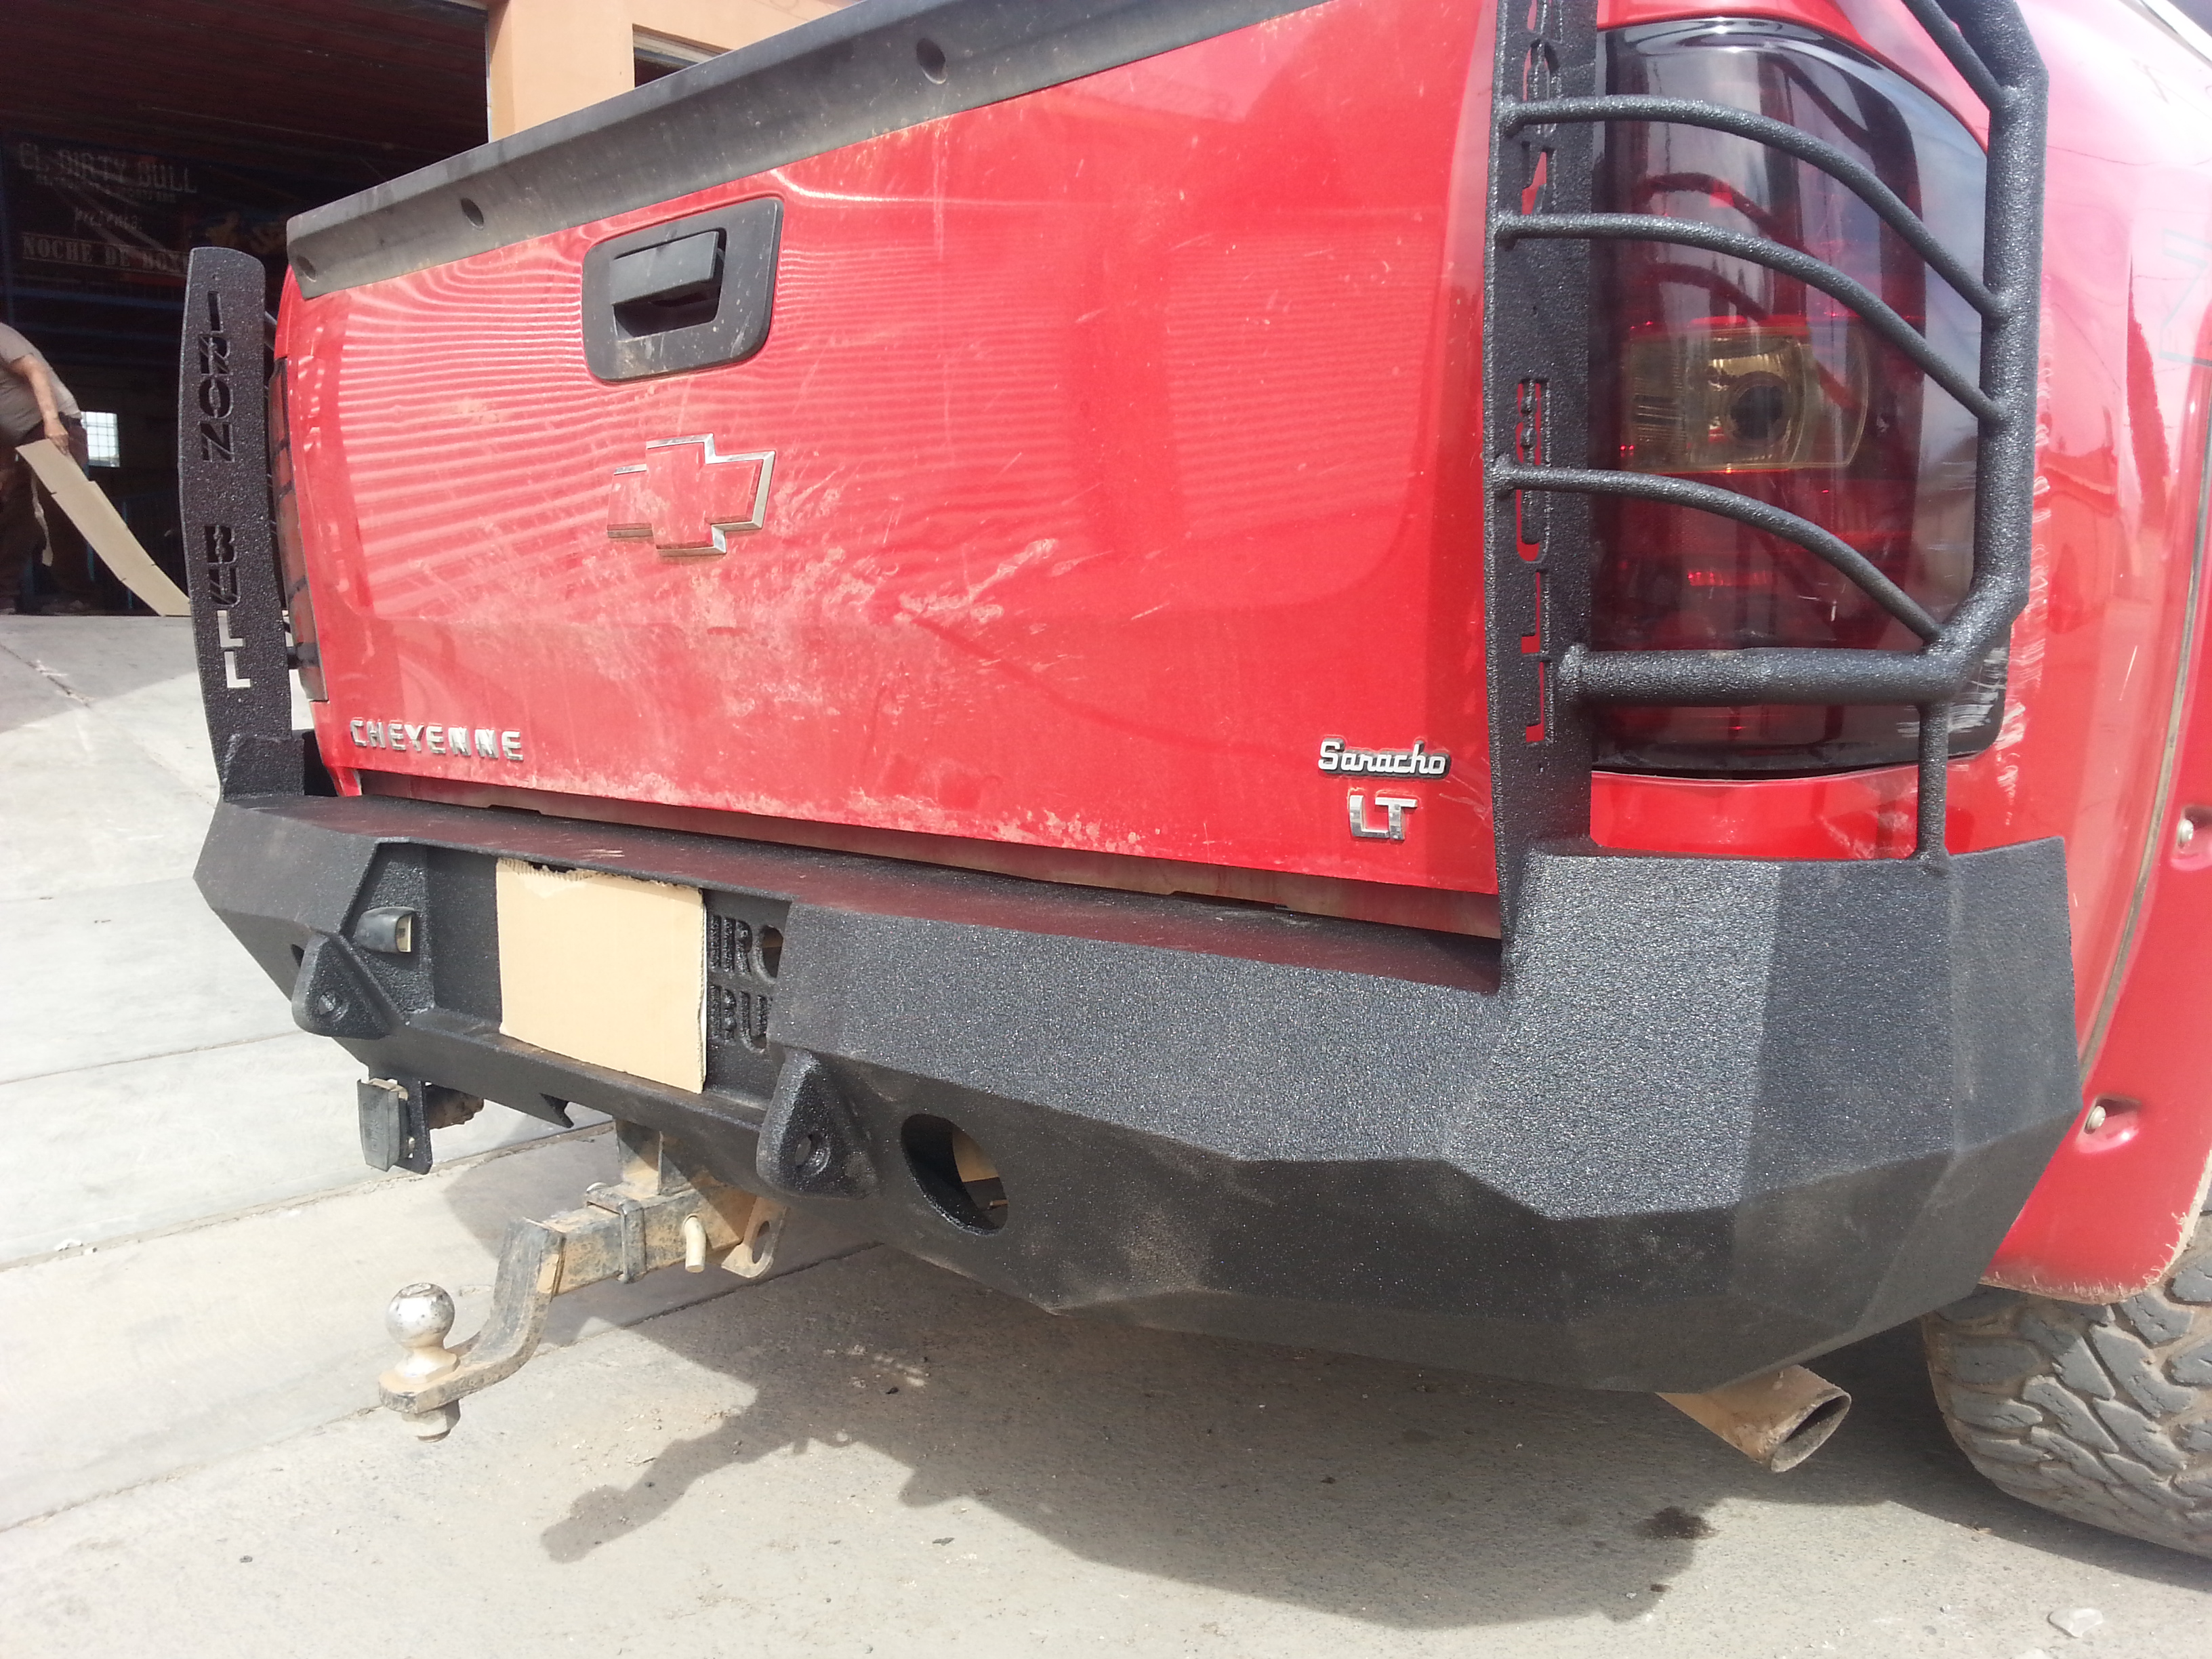 07-14 Chevy 1500 rear base bumper with tail light guards